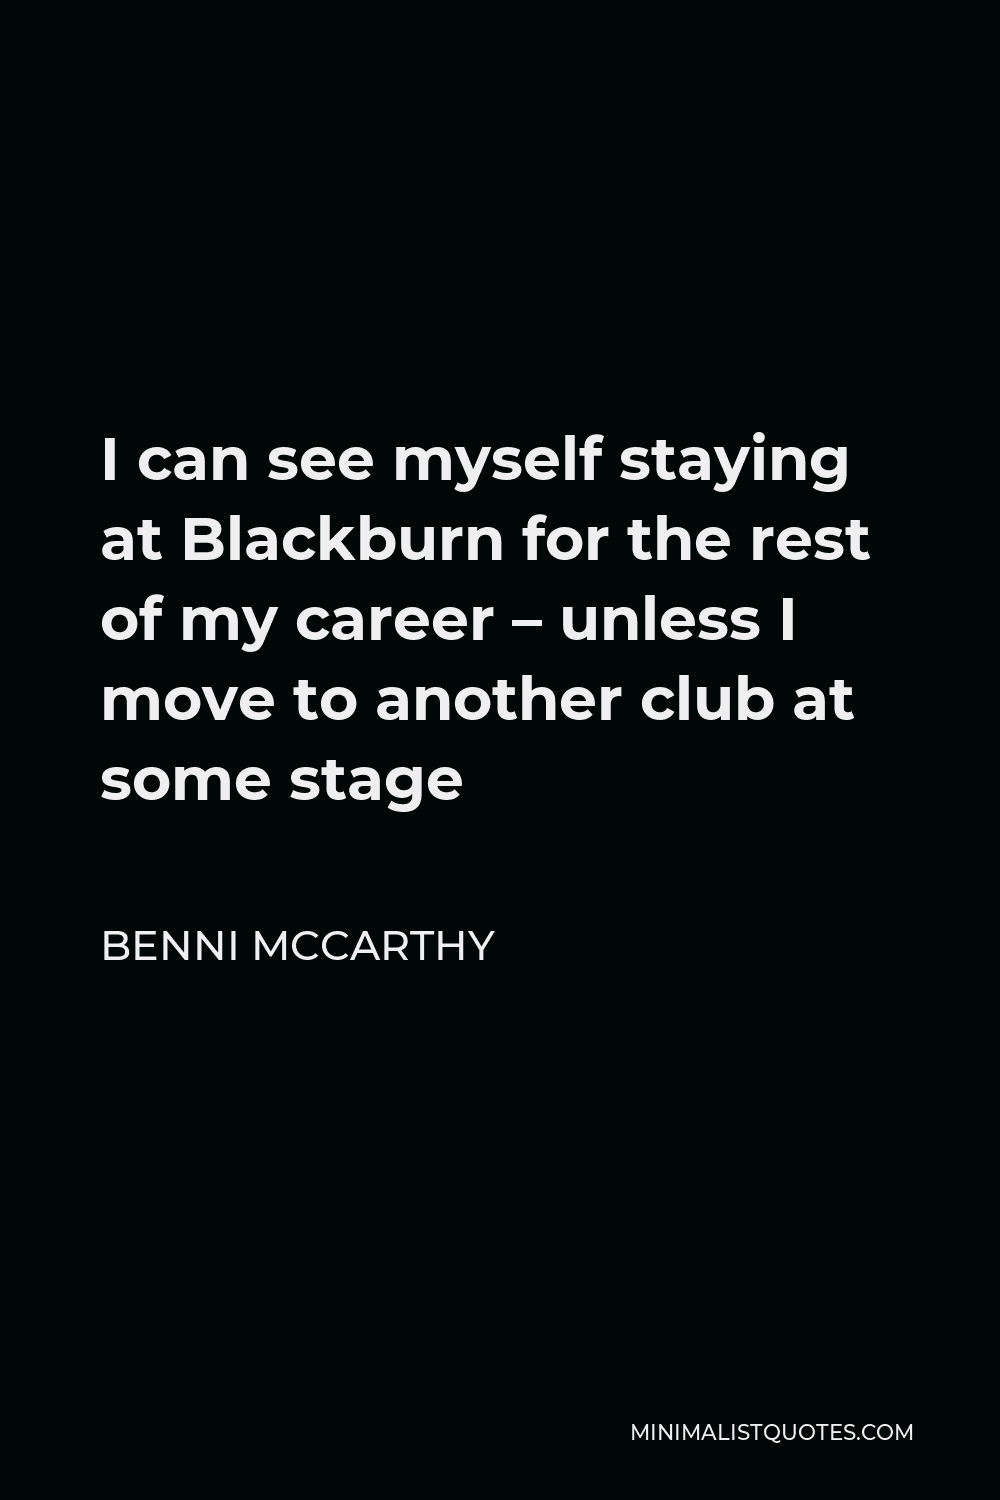 Benni McCarthy Quote - I can see myself staying at Blackburn for the rest of my career – unless I move to another club at some stage